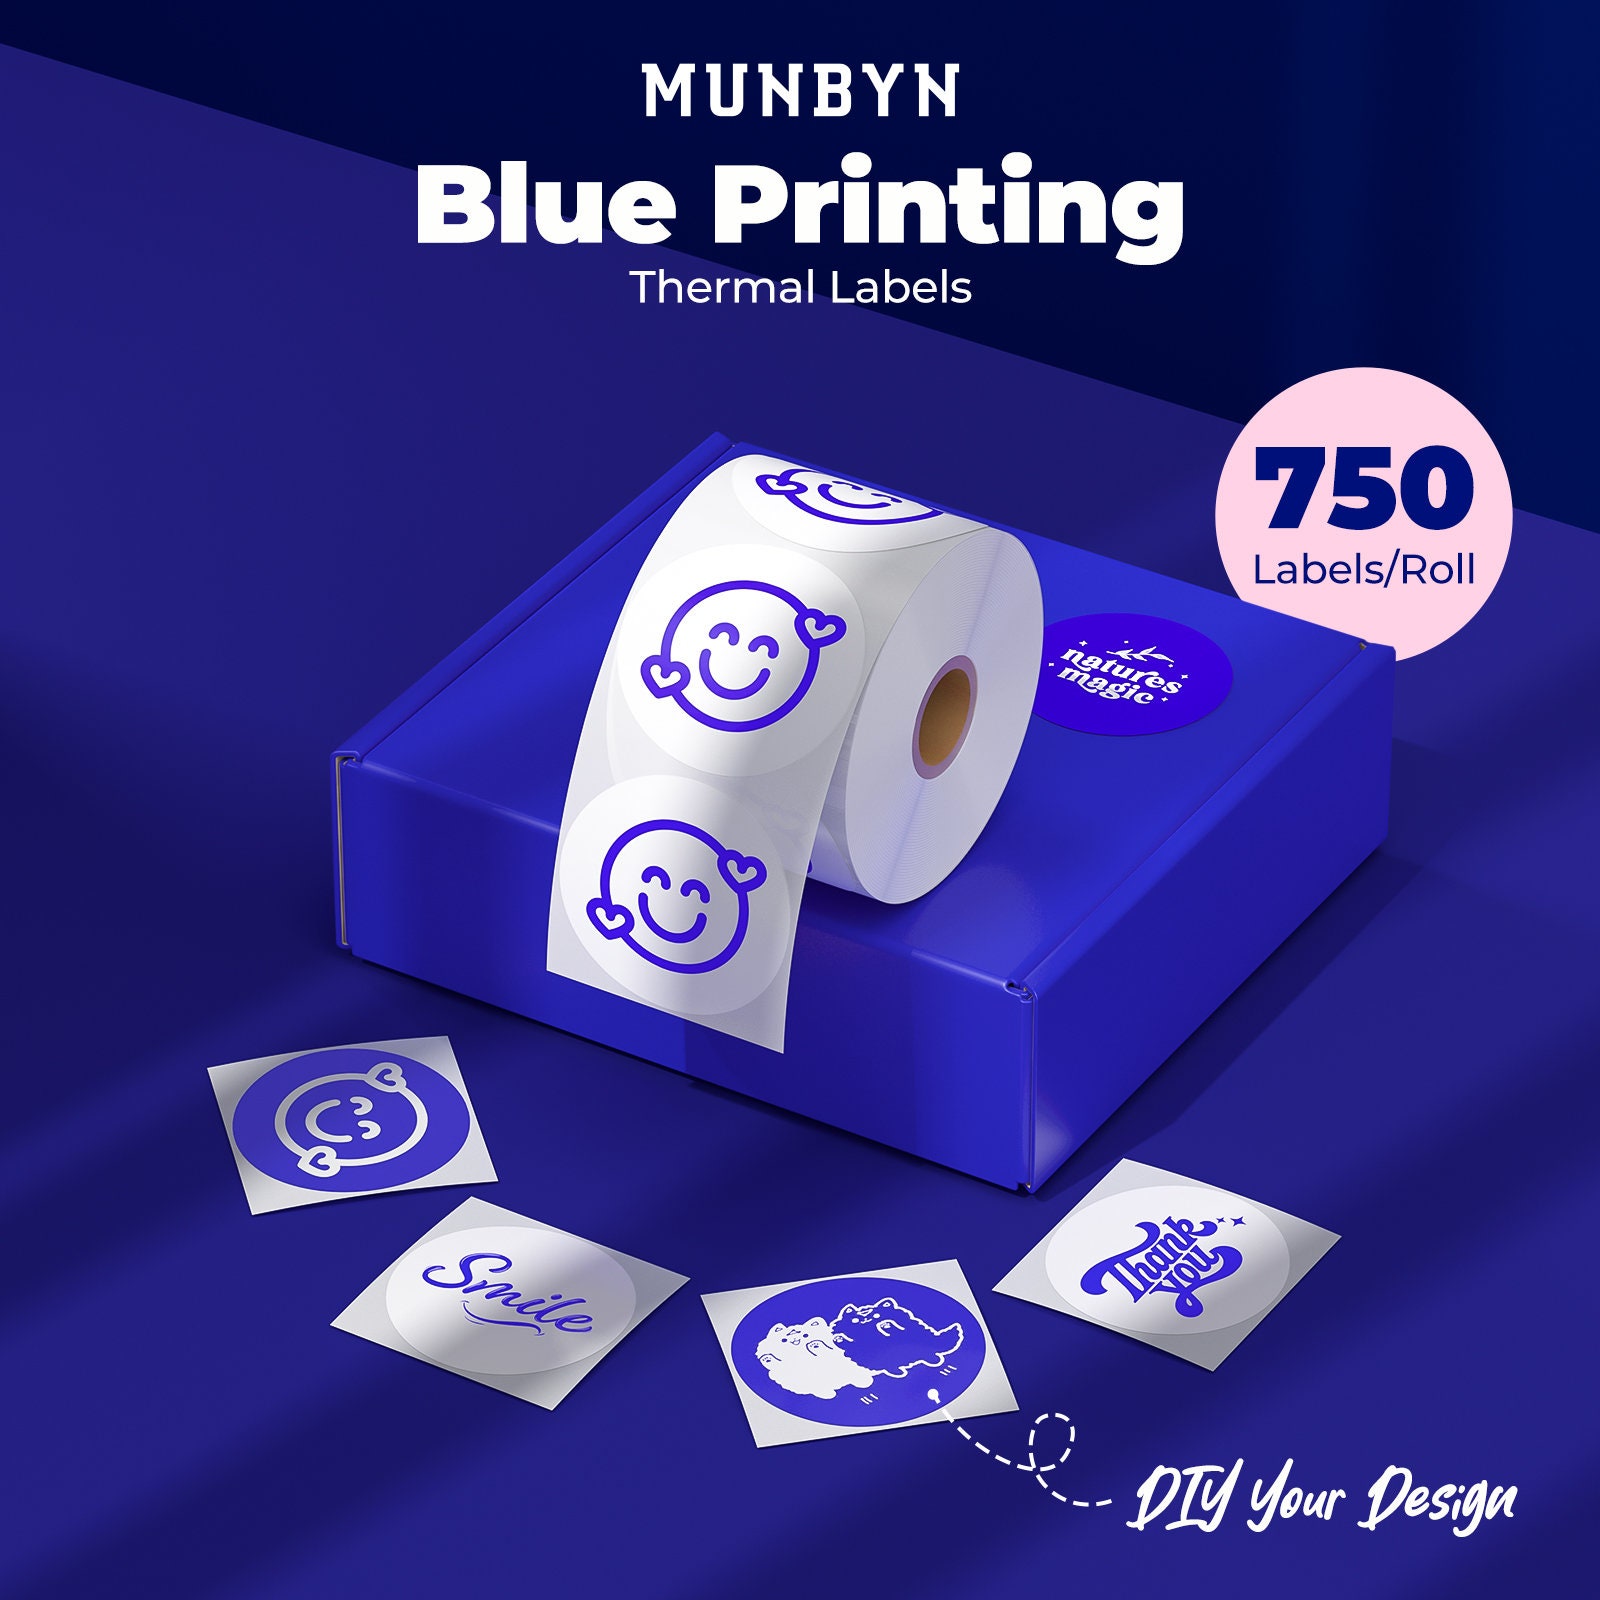 MUNBYN 2 750 Blue White Printing Thermal Label Stickers, Multi-Purpose Blue  Round Thermal Sticker Label for Small Business, Package, Design -   België